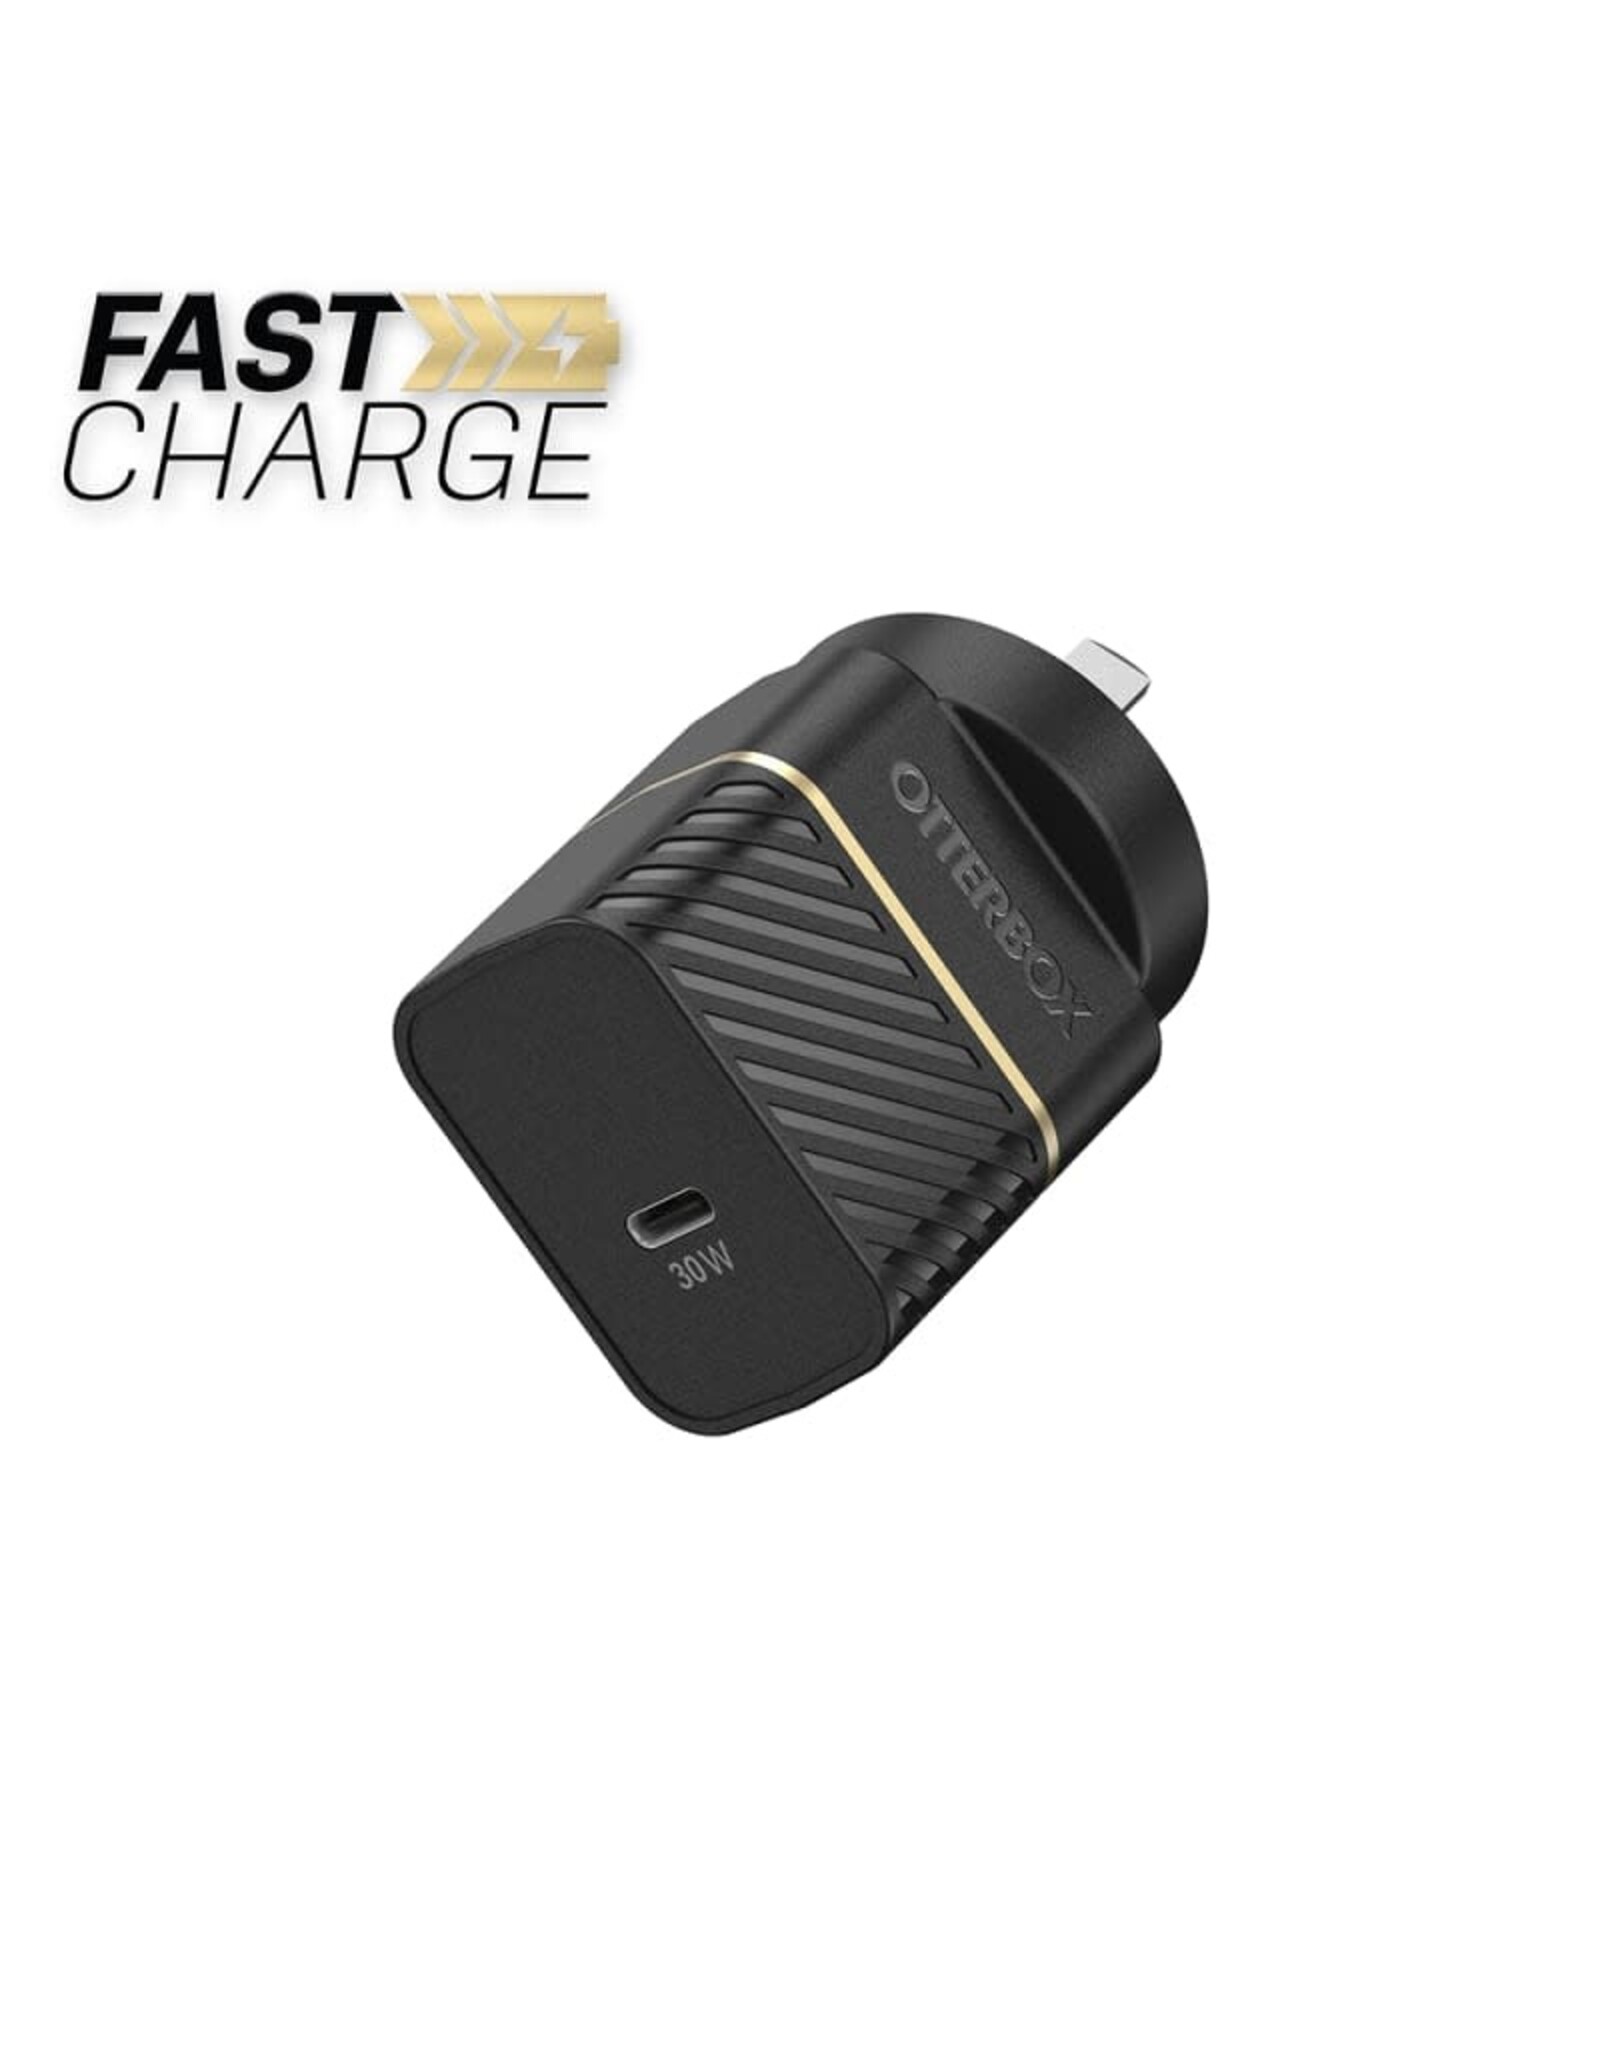 Otterbox OtterBox 30W USB-C Fast Charge Wall Charger - Black Shimmer